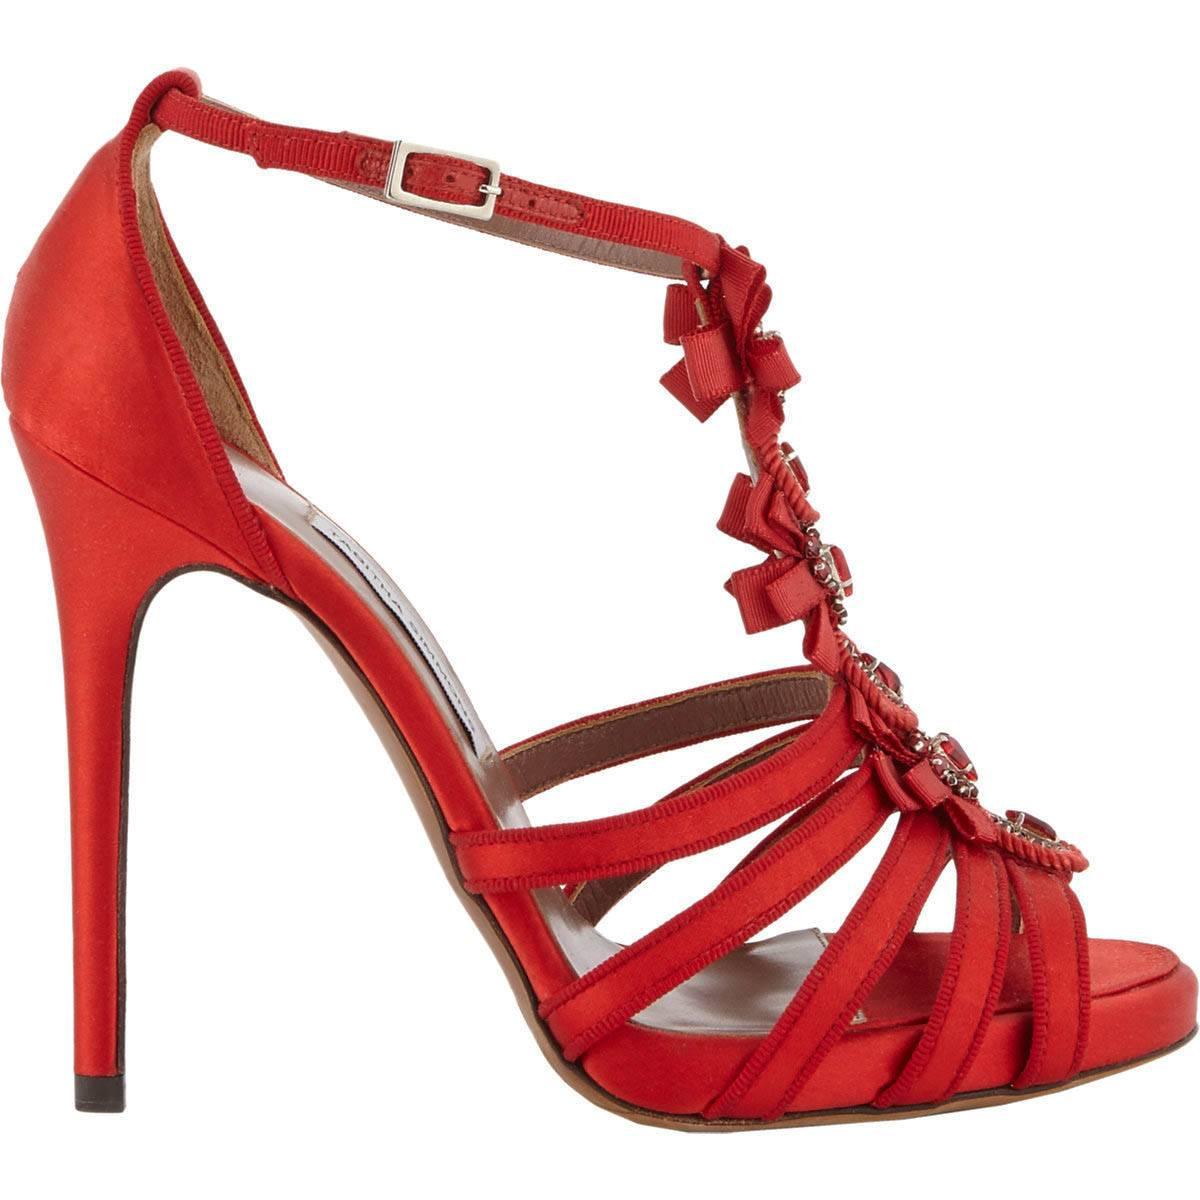 New TABITHA SIMMONS Knotting T-Strap Sandals
Italian Size 38 - US 8
Color - Red
Jewel-Embellished Rope, Grosgrain Bows, Open Toe, Multi-Strap Vamp, Tonal Grosgrain Trim
Thin Ankle Strap with Silver Tone Buckle, Satin-Covered Stiletto Heel, Leather